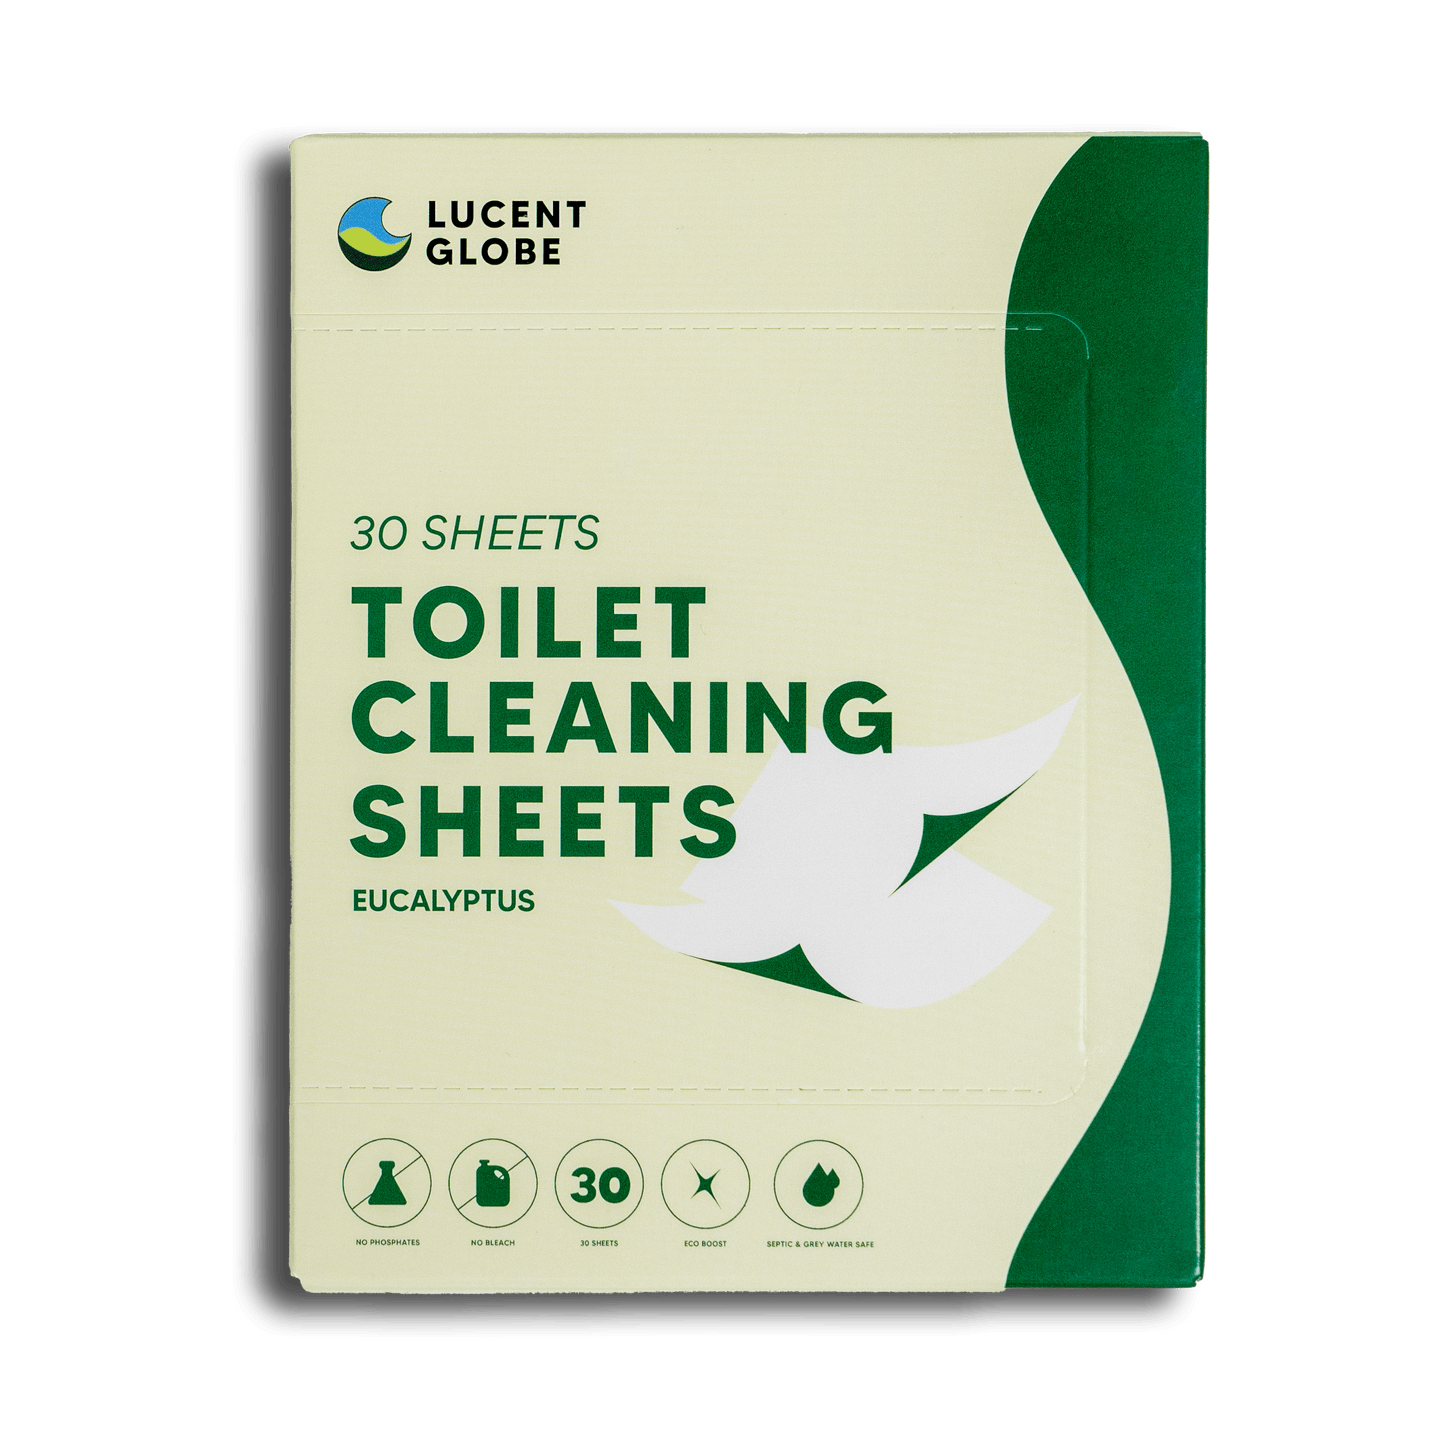 Toilet Cleaning Sheets